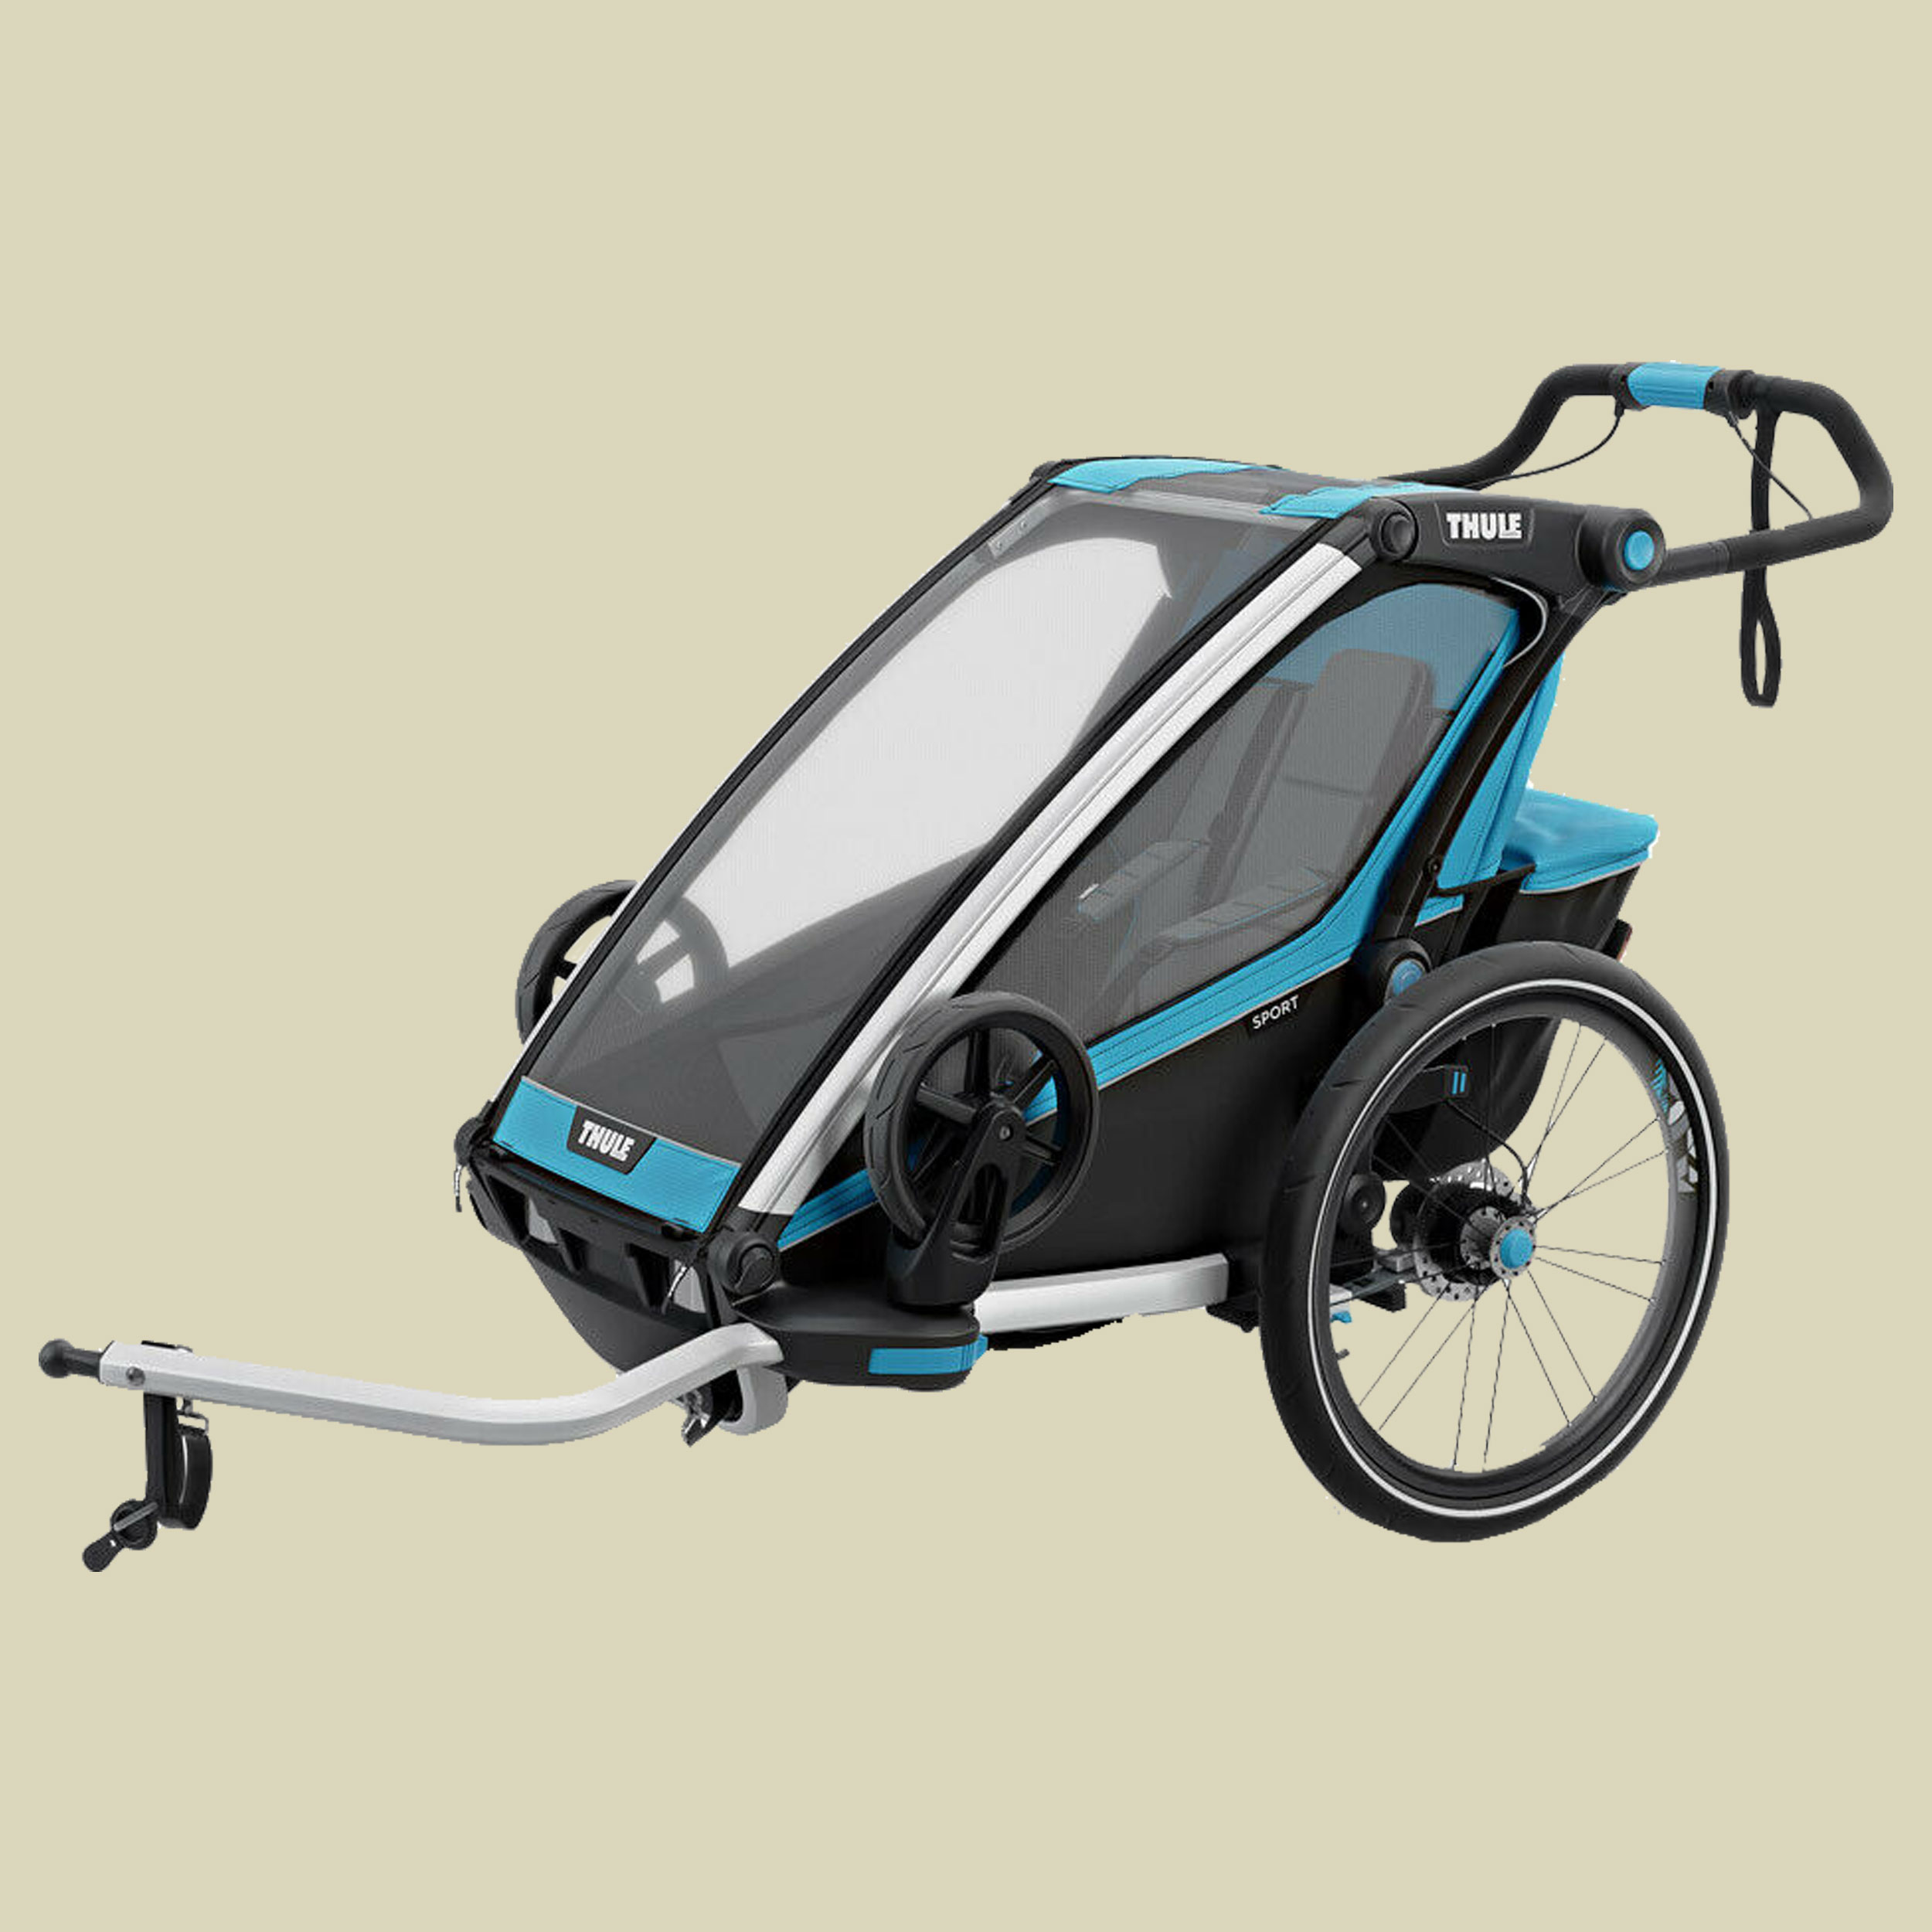 Chariot Sport 1 mit StVZO-Beleuchtung Farbe thule blue/black